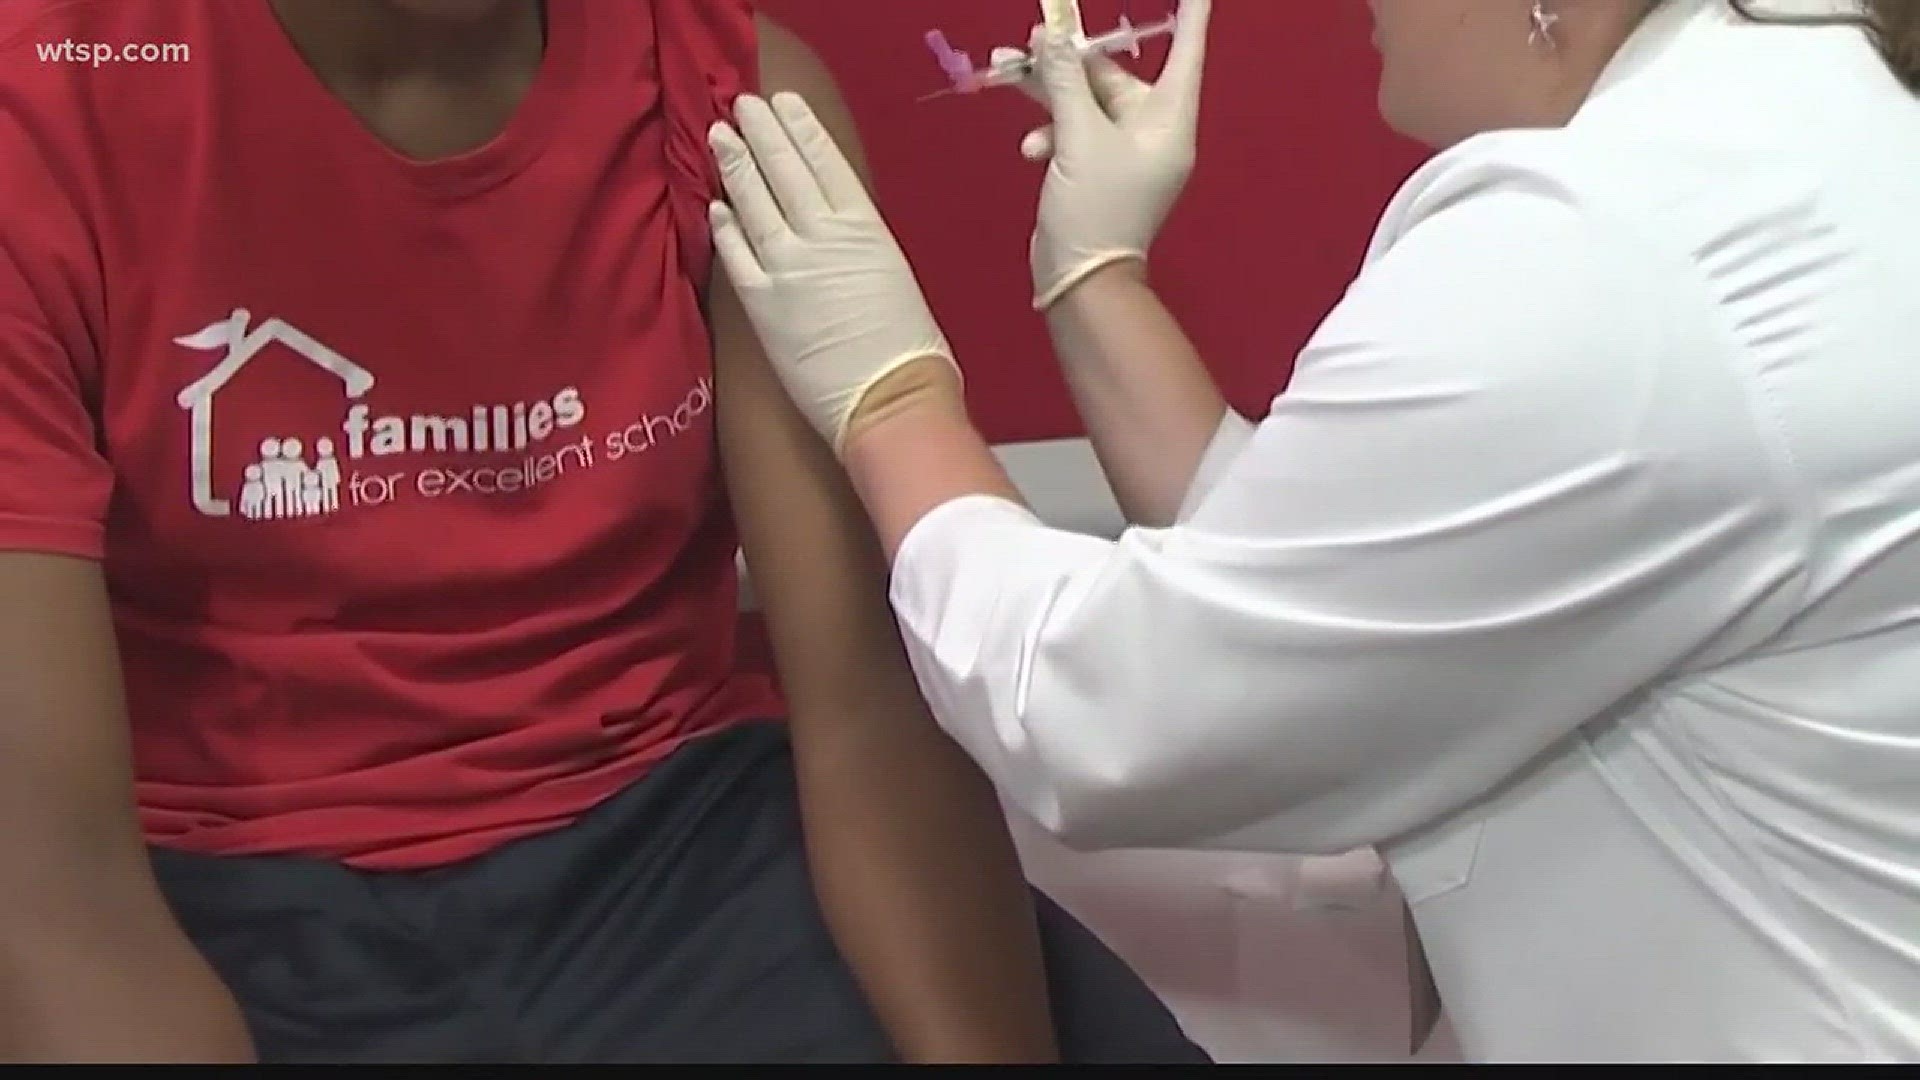 Florida bill would require HPV vaccination for public school students